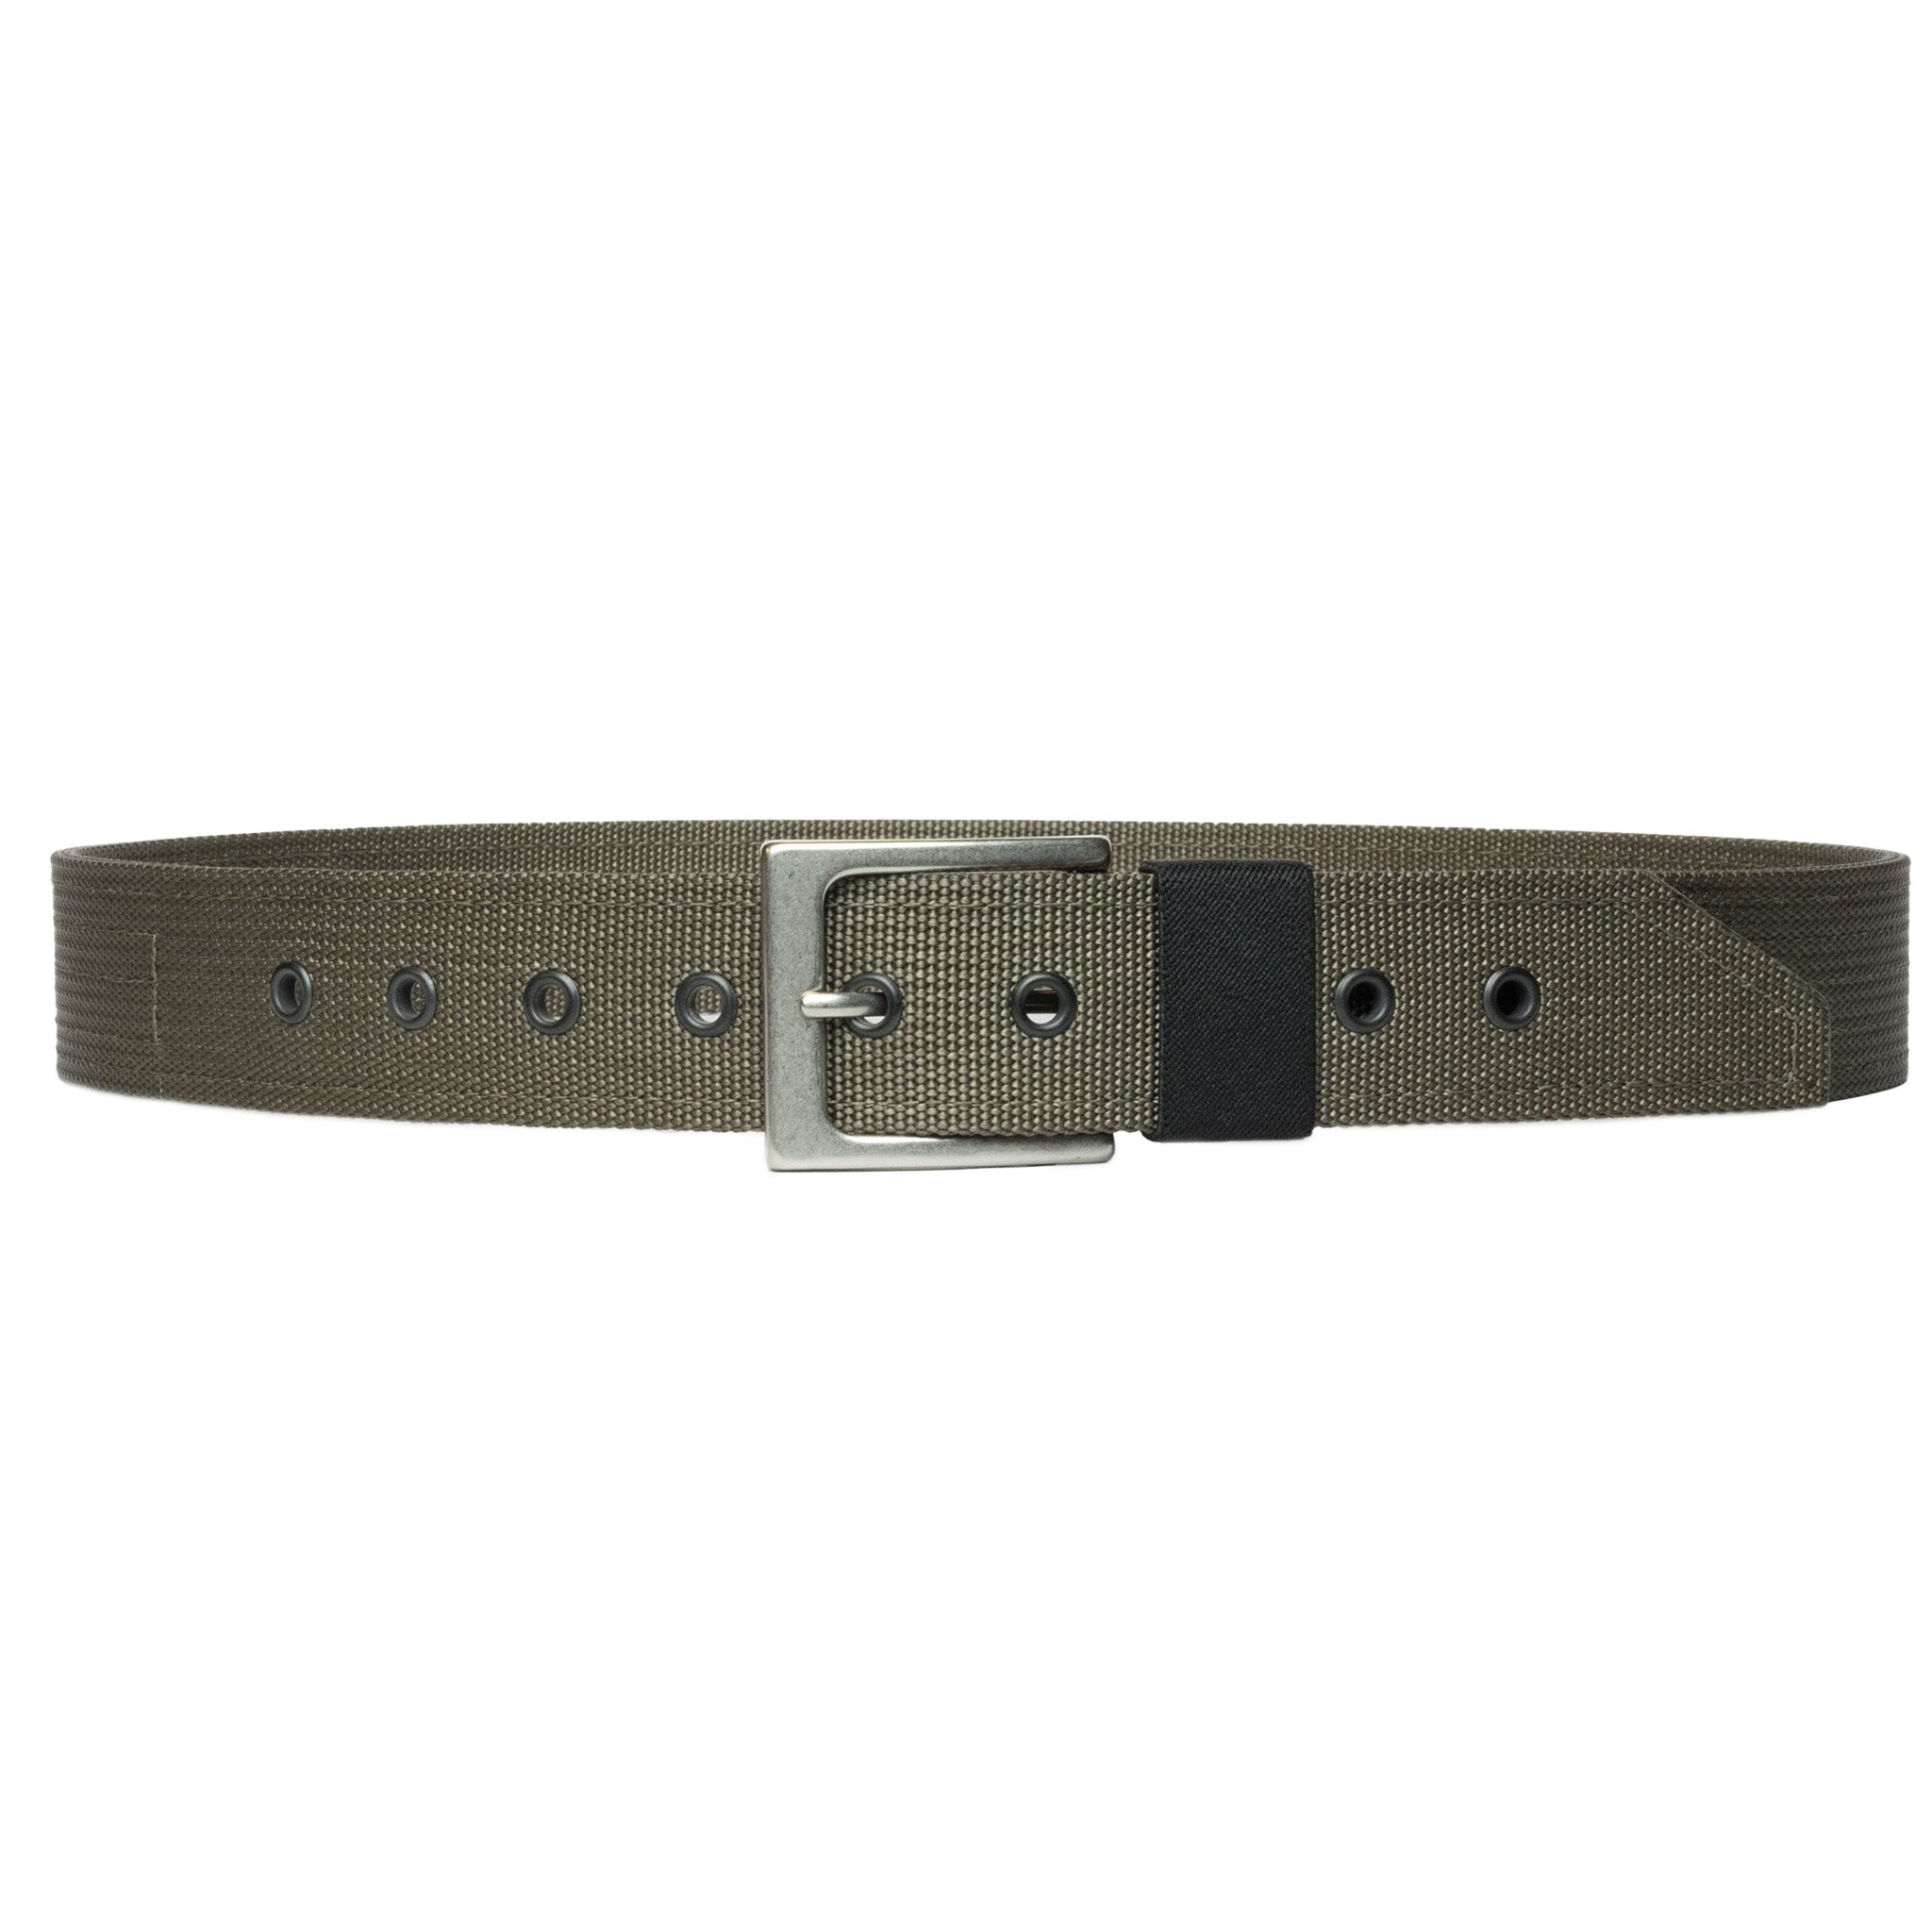 Emissary EDC Belt in Ranger Green with Silver Buckle